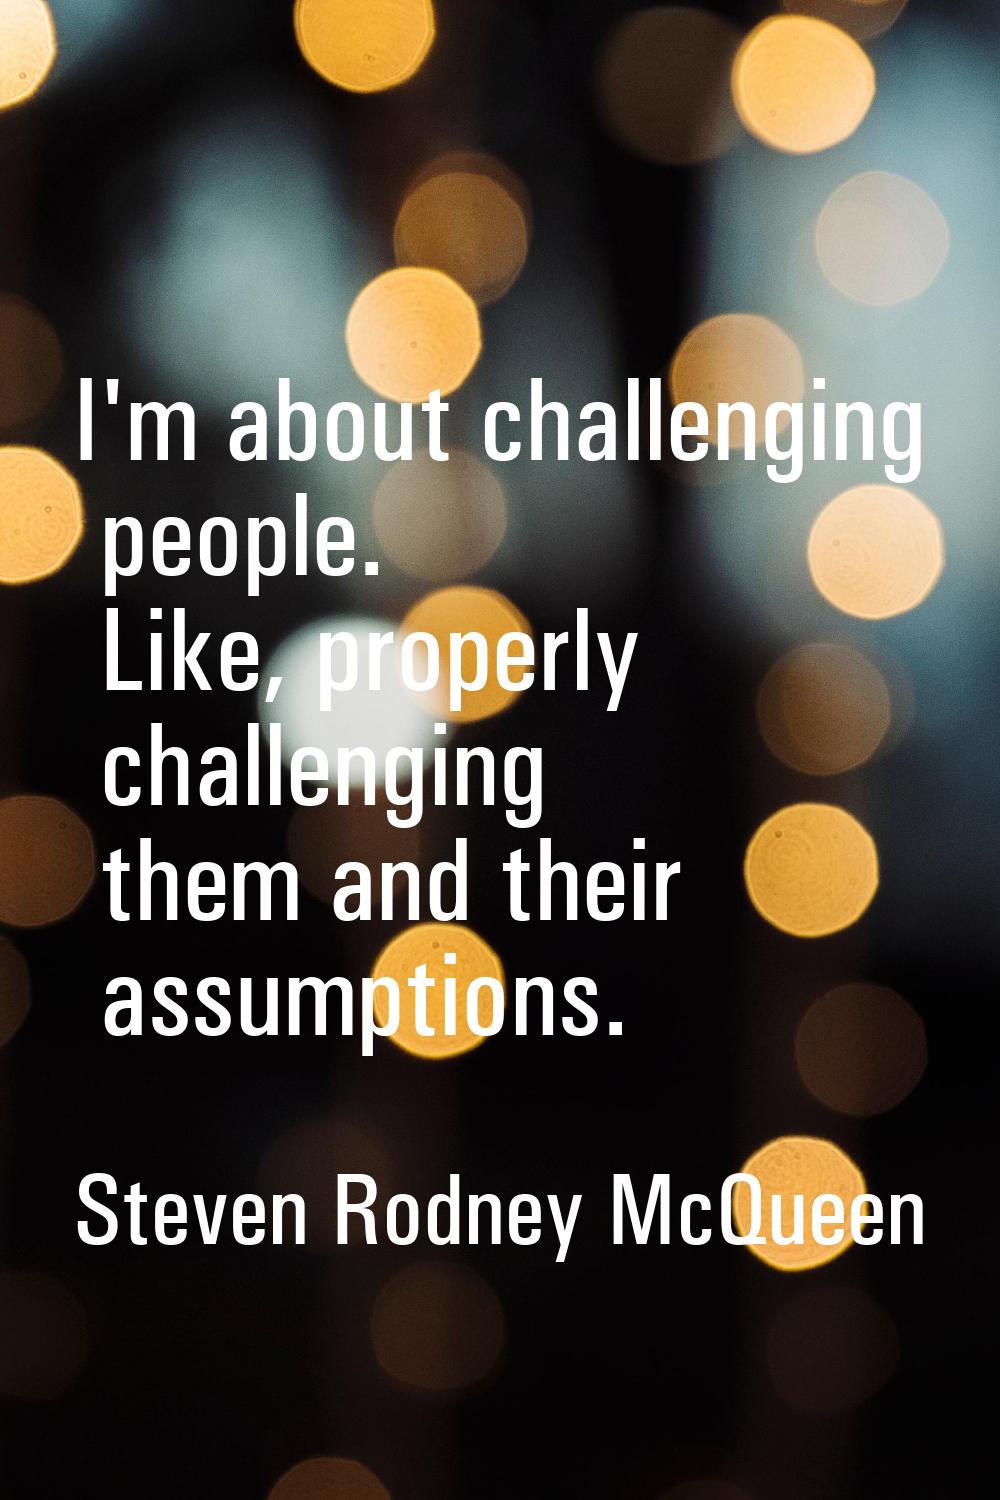 I'm about challenging people. Like, properly challenging them and their assumptions.